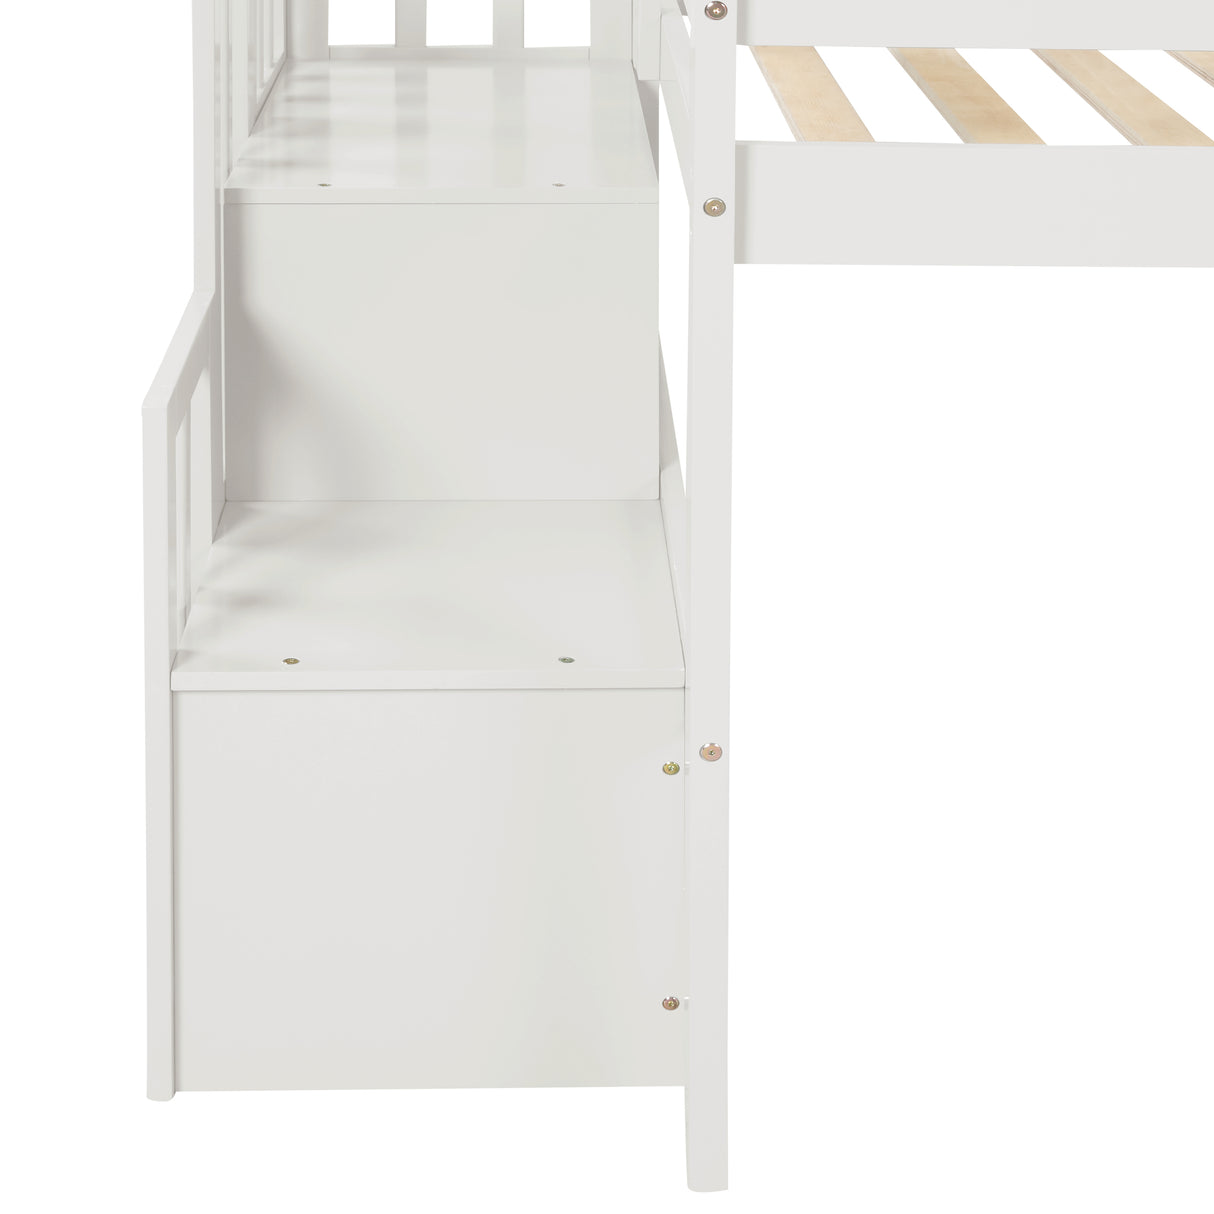 Loft bed with staircase , White - Home Elegance USA